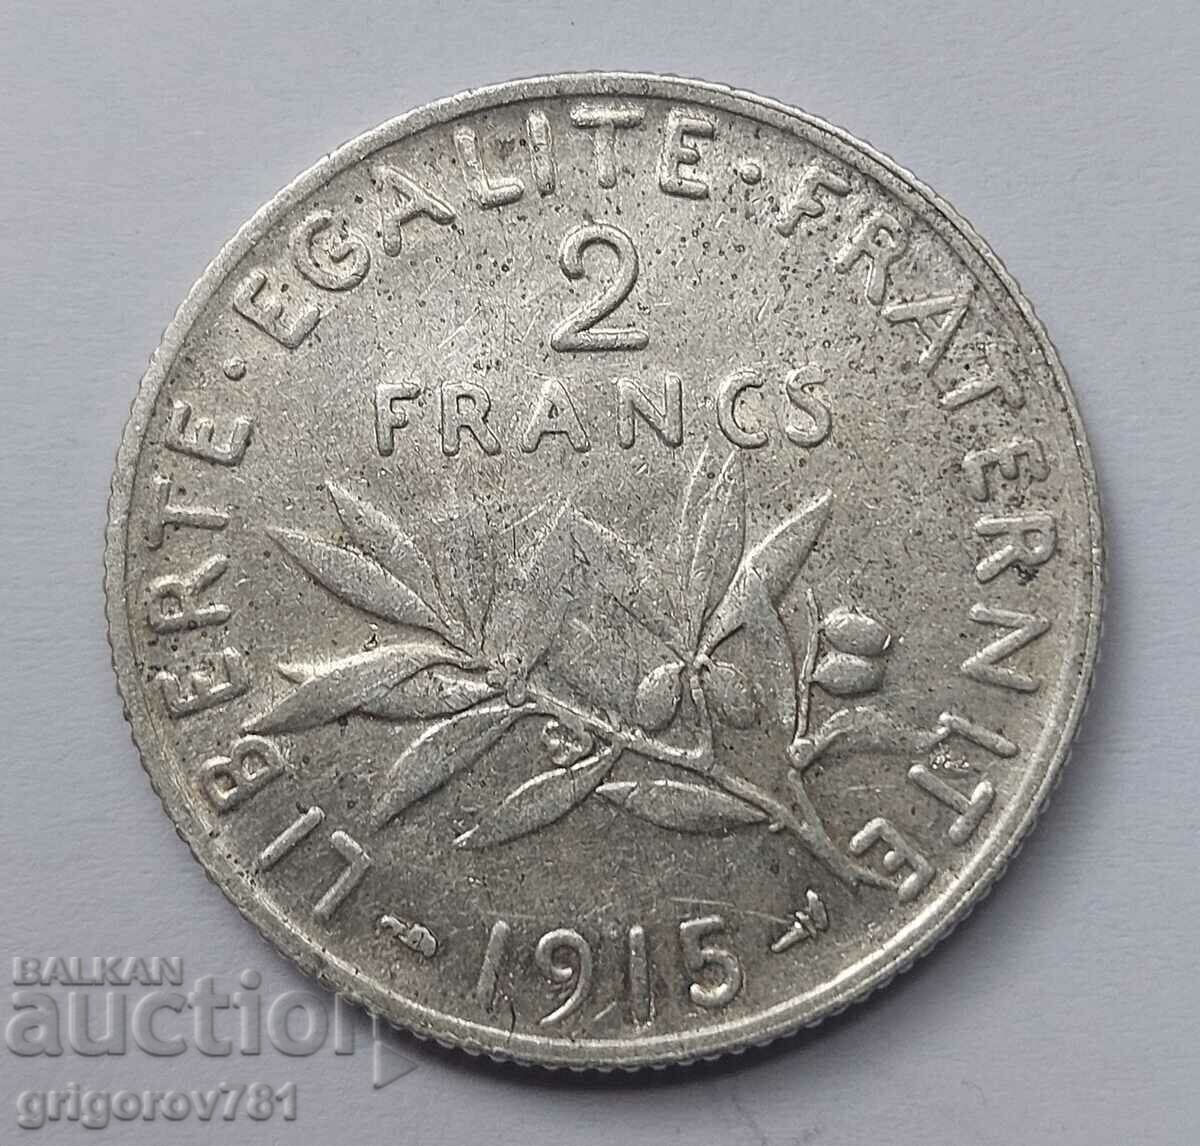 2 Francs Silver France 1915 - Silver Coin #57